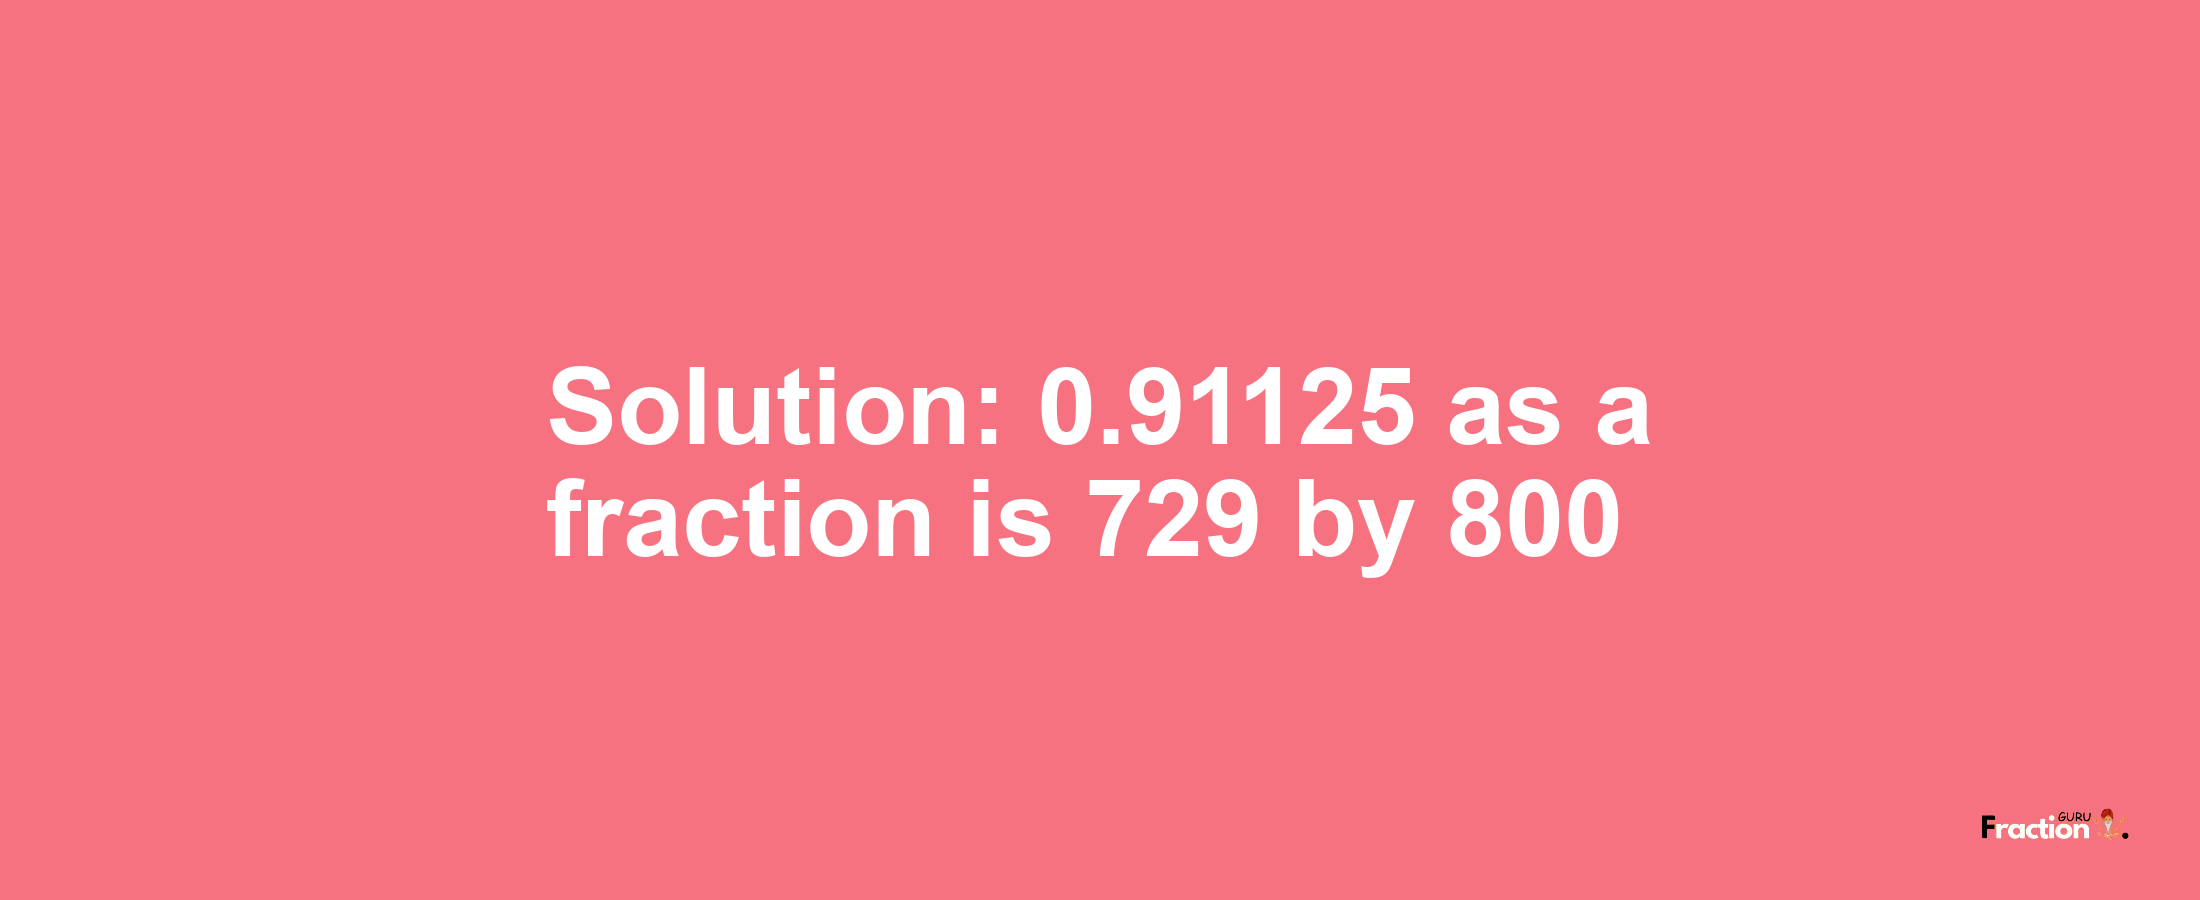 Solution:0.91125 as a fraction is 729/800